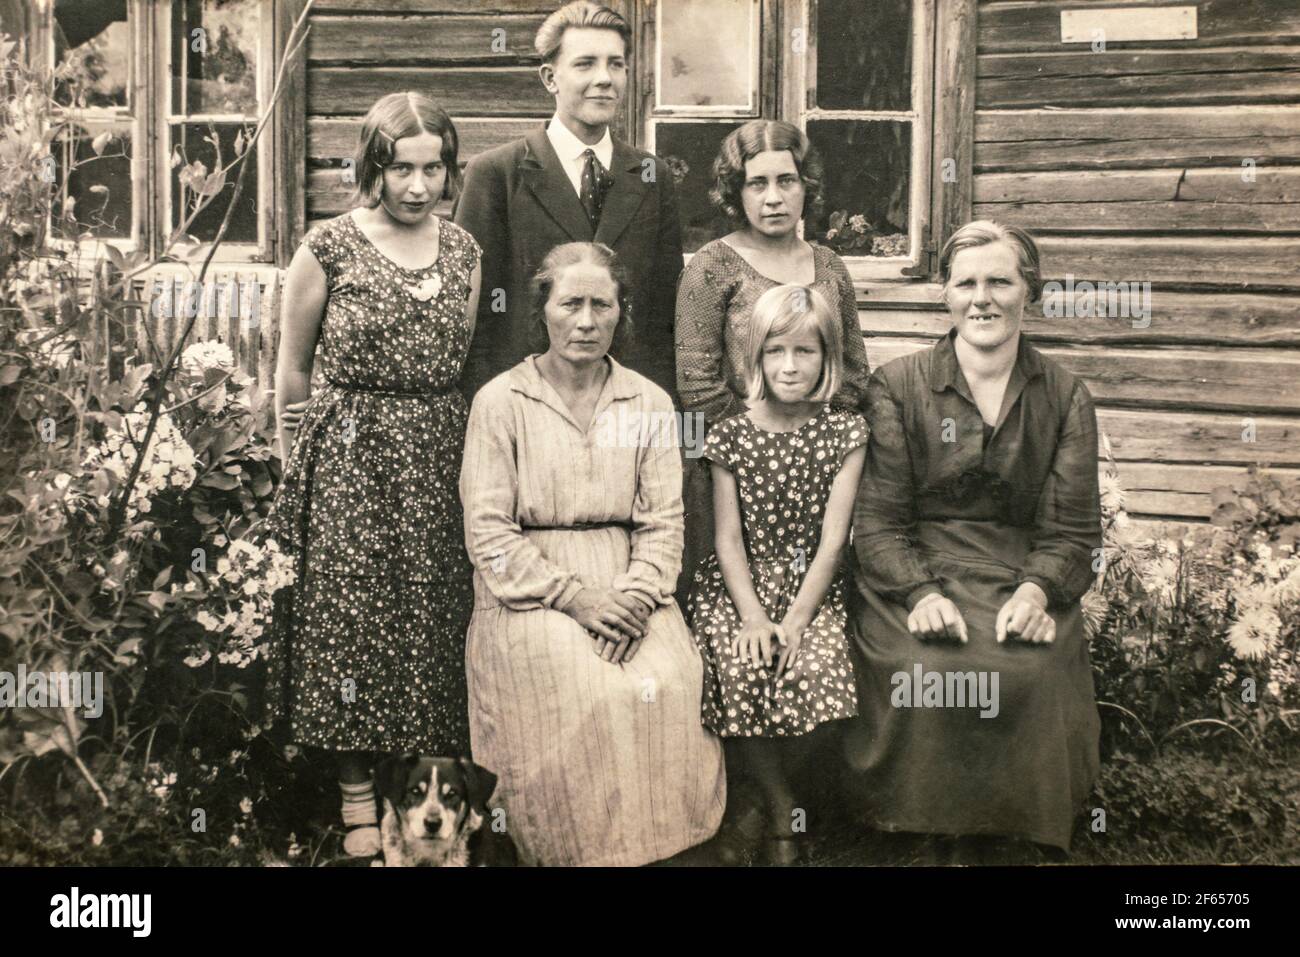 Latvia - CIRCA 1920s: Group portrait shot of five female and man outdoors next to entrance of country house. Vintage Art deco era photo Stock Photo